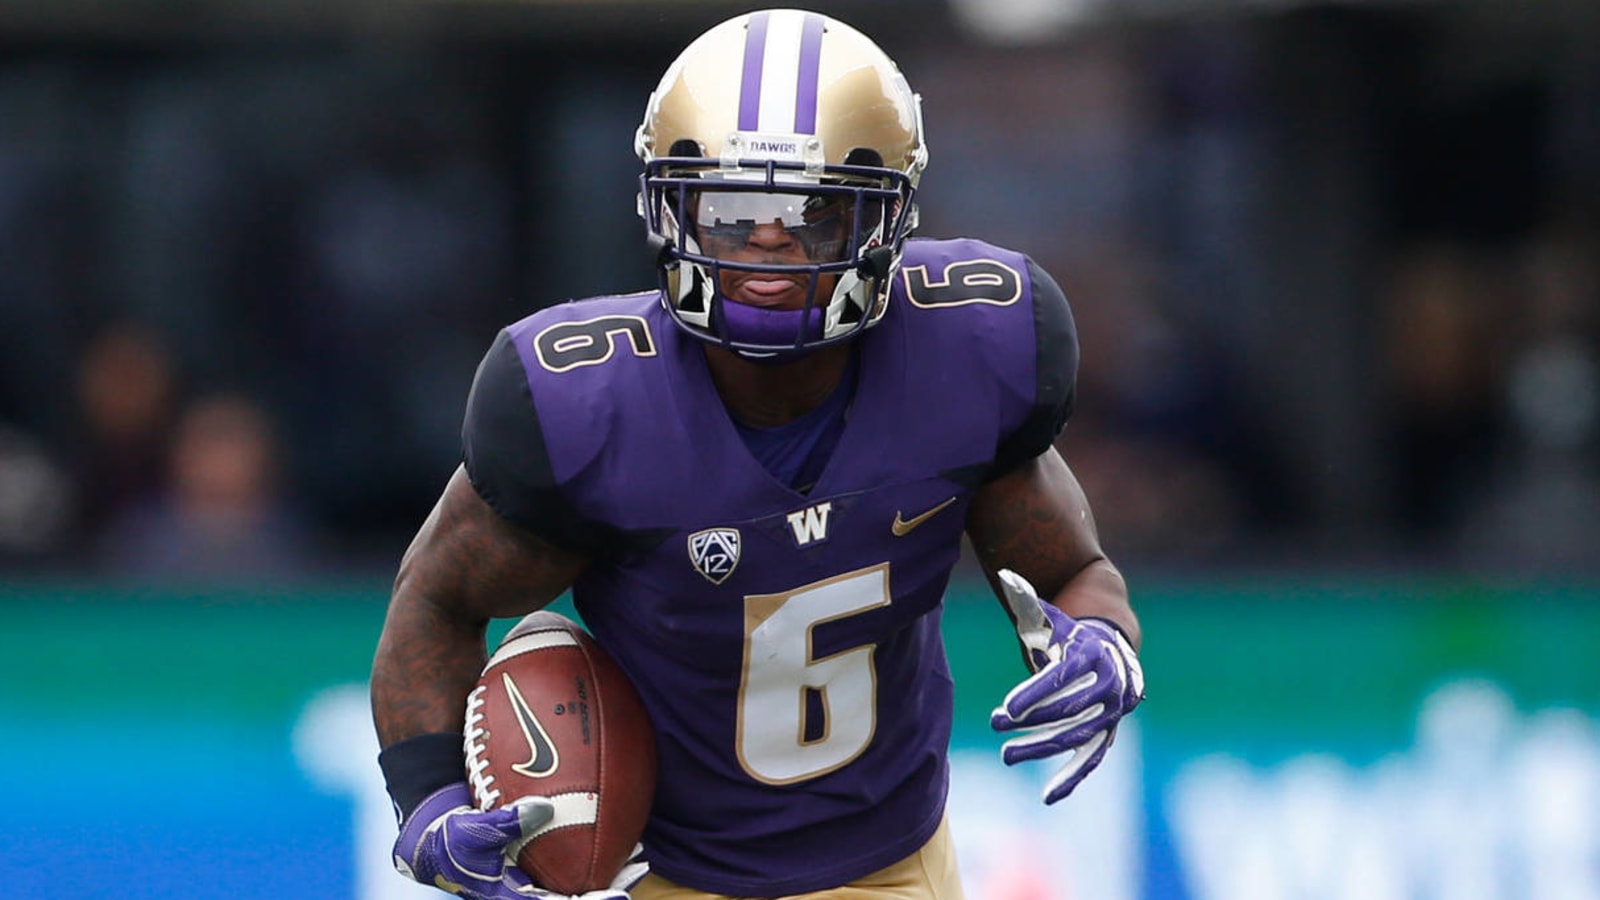 Watch: Huskies penalized for getting too tricky on kickoff return